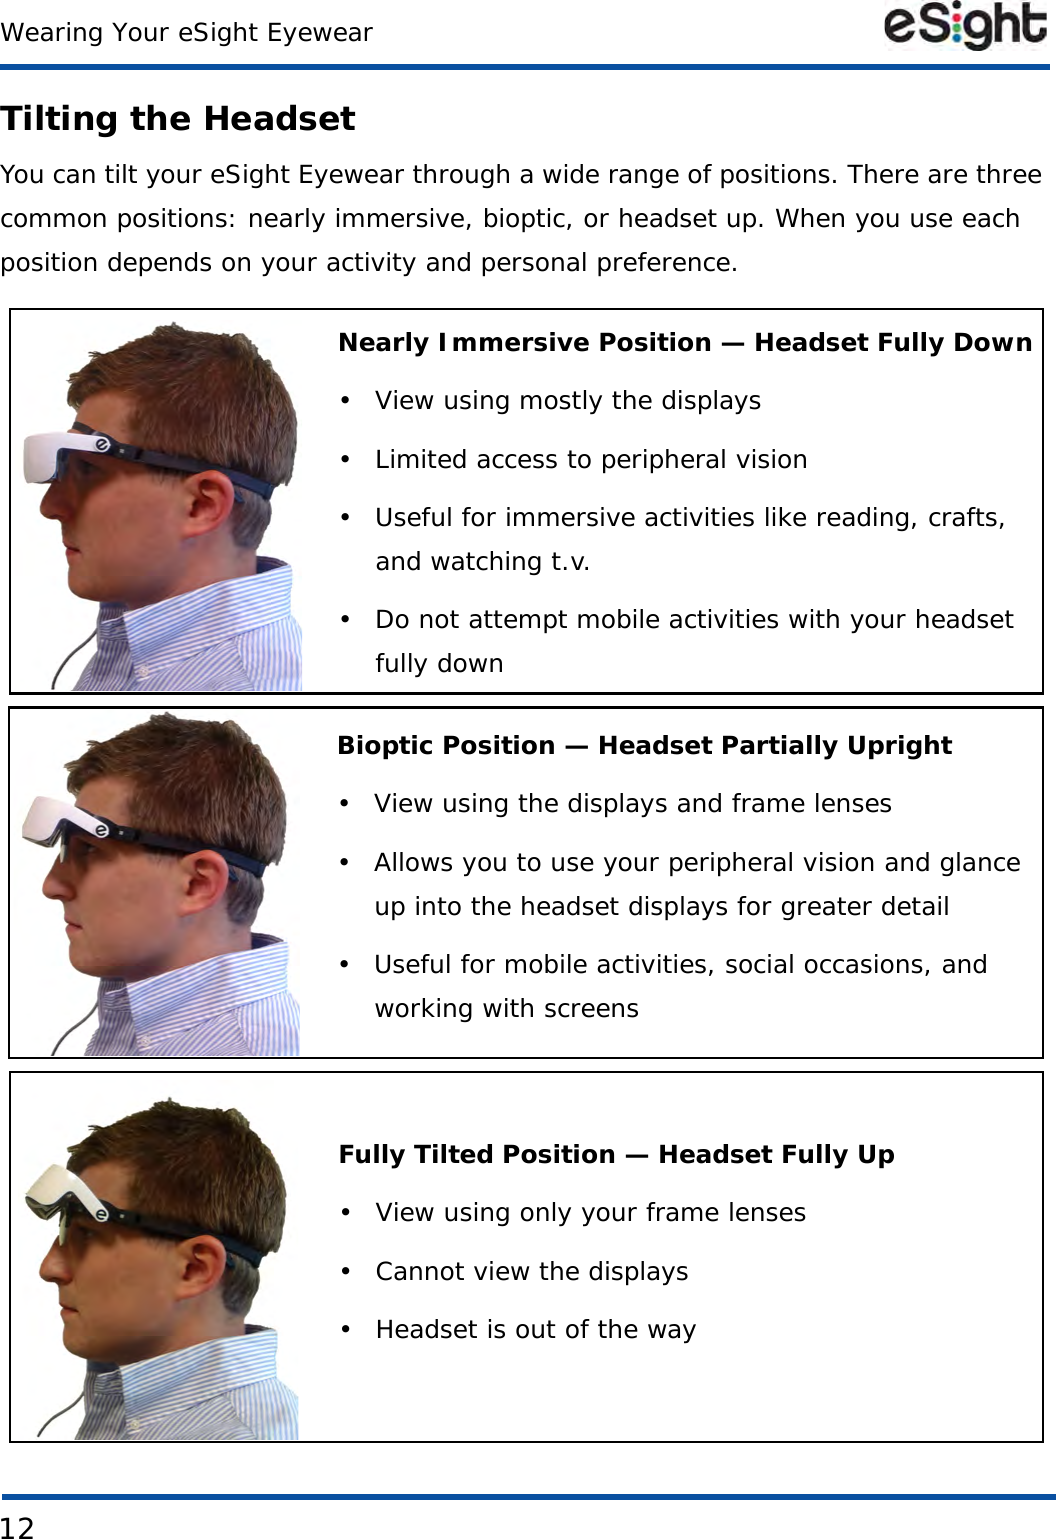 12Wearing Your eSight EyewearTilting the HeadsetYou can tilt your eSight Eyewear through a wide range of positions. There are three common positions: nearly immersive, bioptic, or headset up. When you use each position depends on your activity and personal preference.Nearly Immersive Position — Headset Fully Down• View using mostly the displays• Limited access to peripheral vision• Useful for immersive activities like reading, crafts, and watching t.v.• Do not attempt mobile activities with your headset fully downBioptic Position — Headset Partially Upright• View using the displays and frame lenses• Allows you to use your peripheral vision and glance up into the headset displays for greater detail• Useful for mobile activities, social occasions, and working with screensFully Tilted Position — Headset Fully Up• View using only your frame lenses• Cannot view the displays• Headset is out of the way